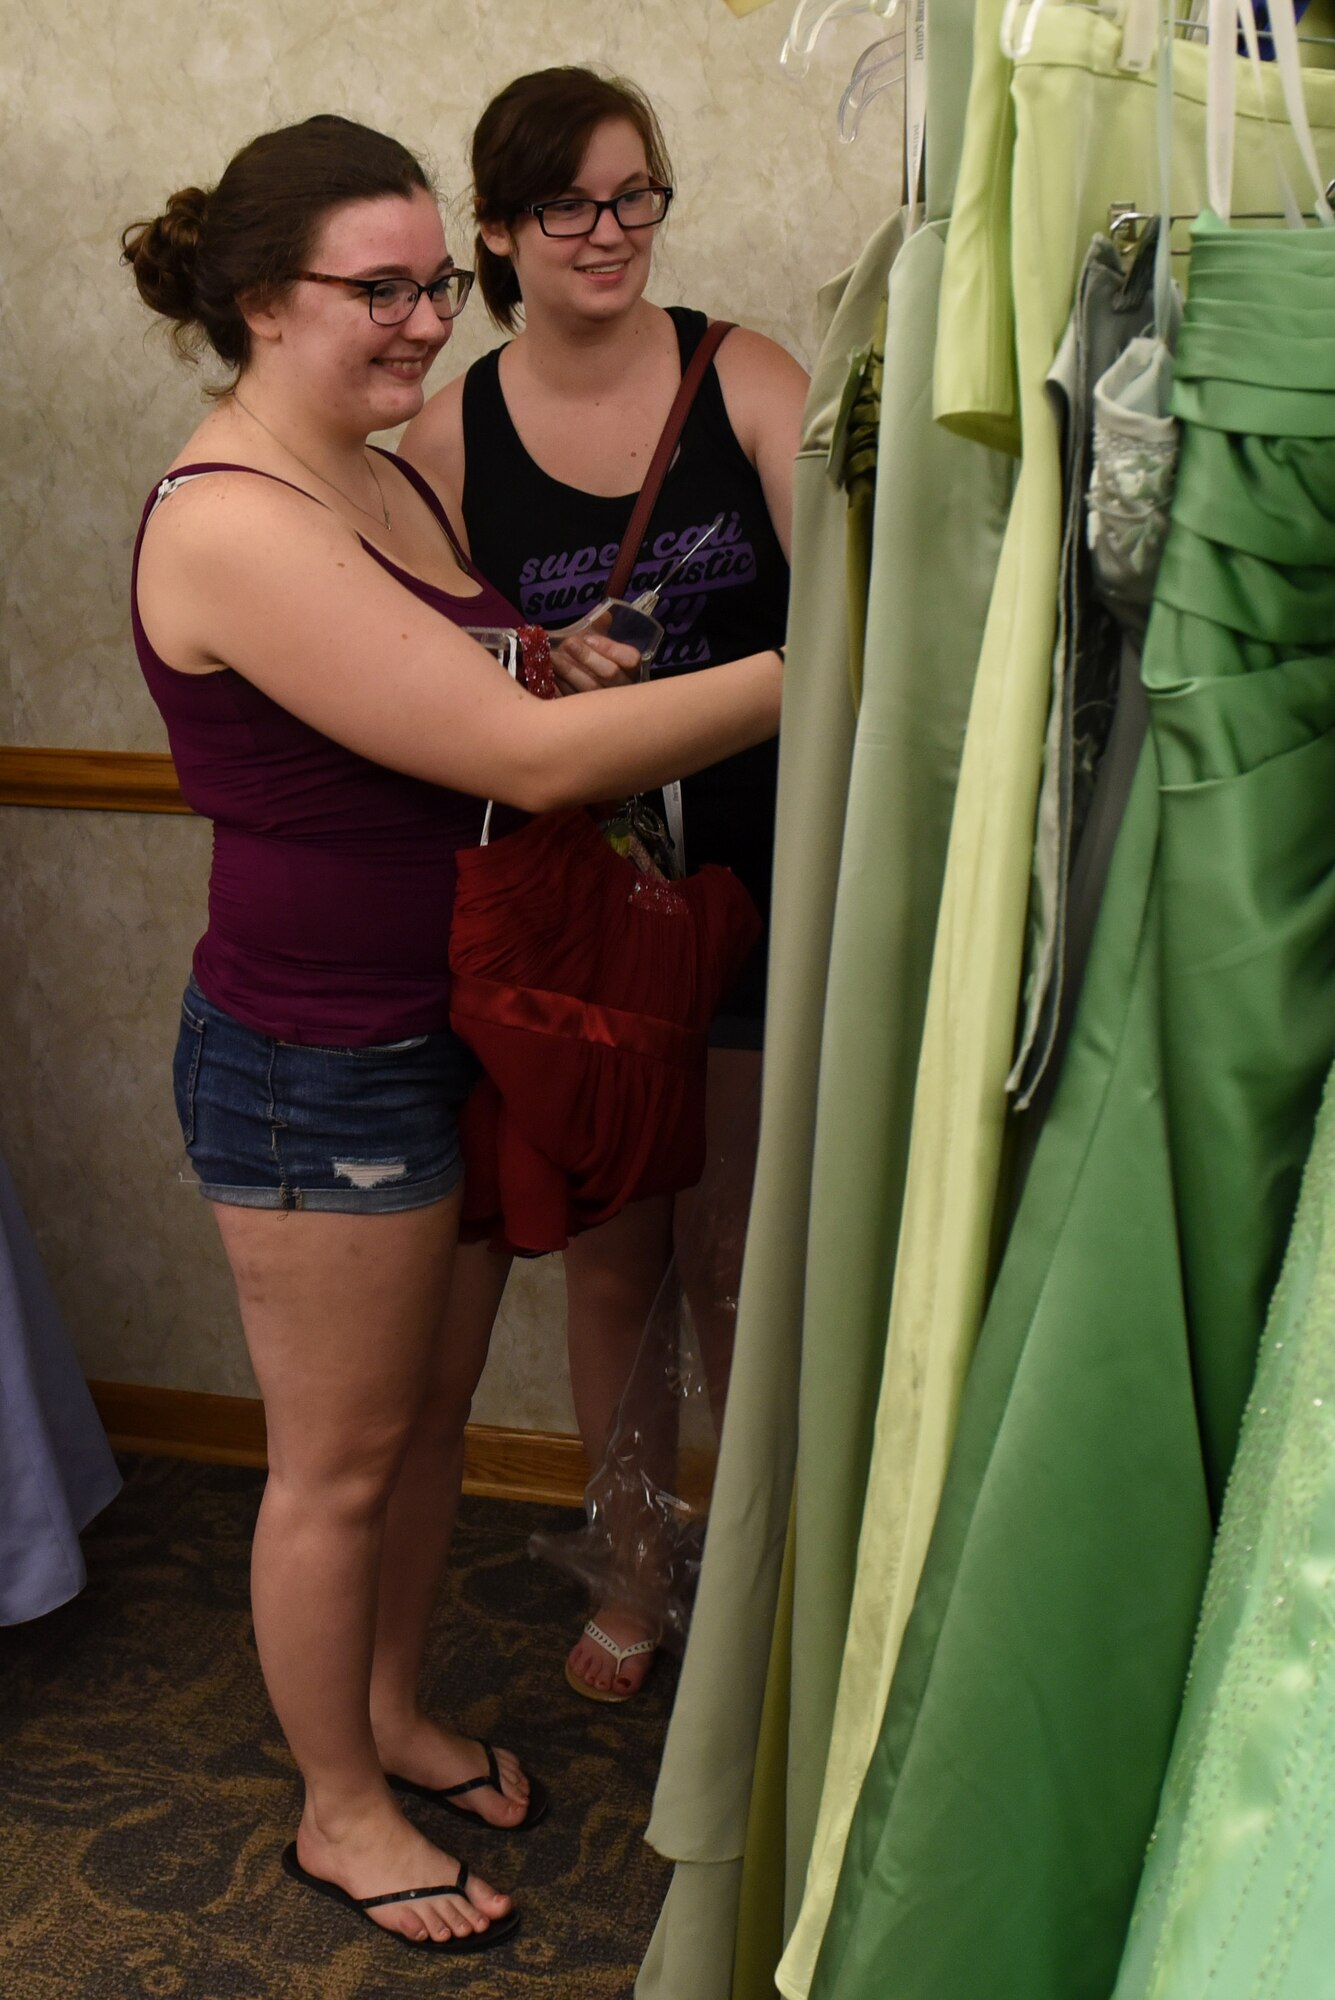 Katie Everett (left), and Cameron Stripling browse through the selection of evening gowns at the Cinderella’s Closet program, Aug. 23, 2017, at Seymour Johnson Air Force Base, North Carolina.